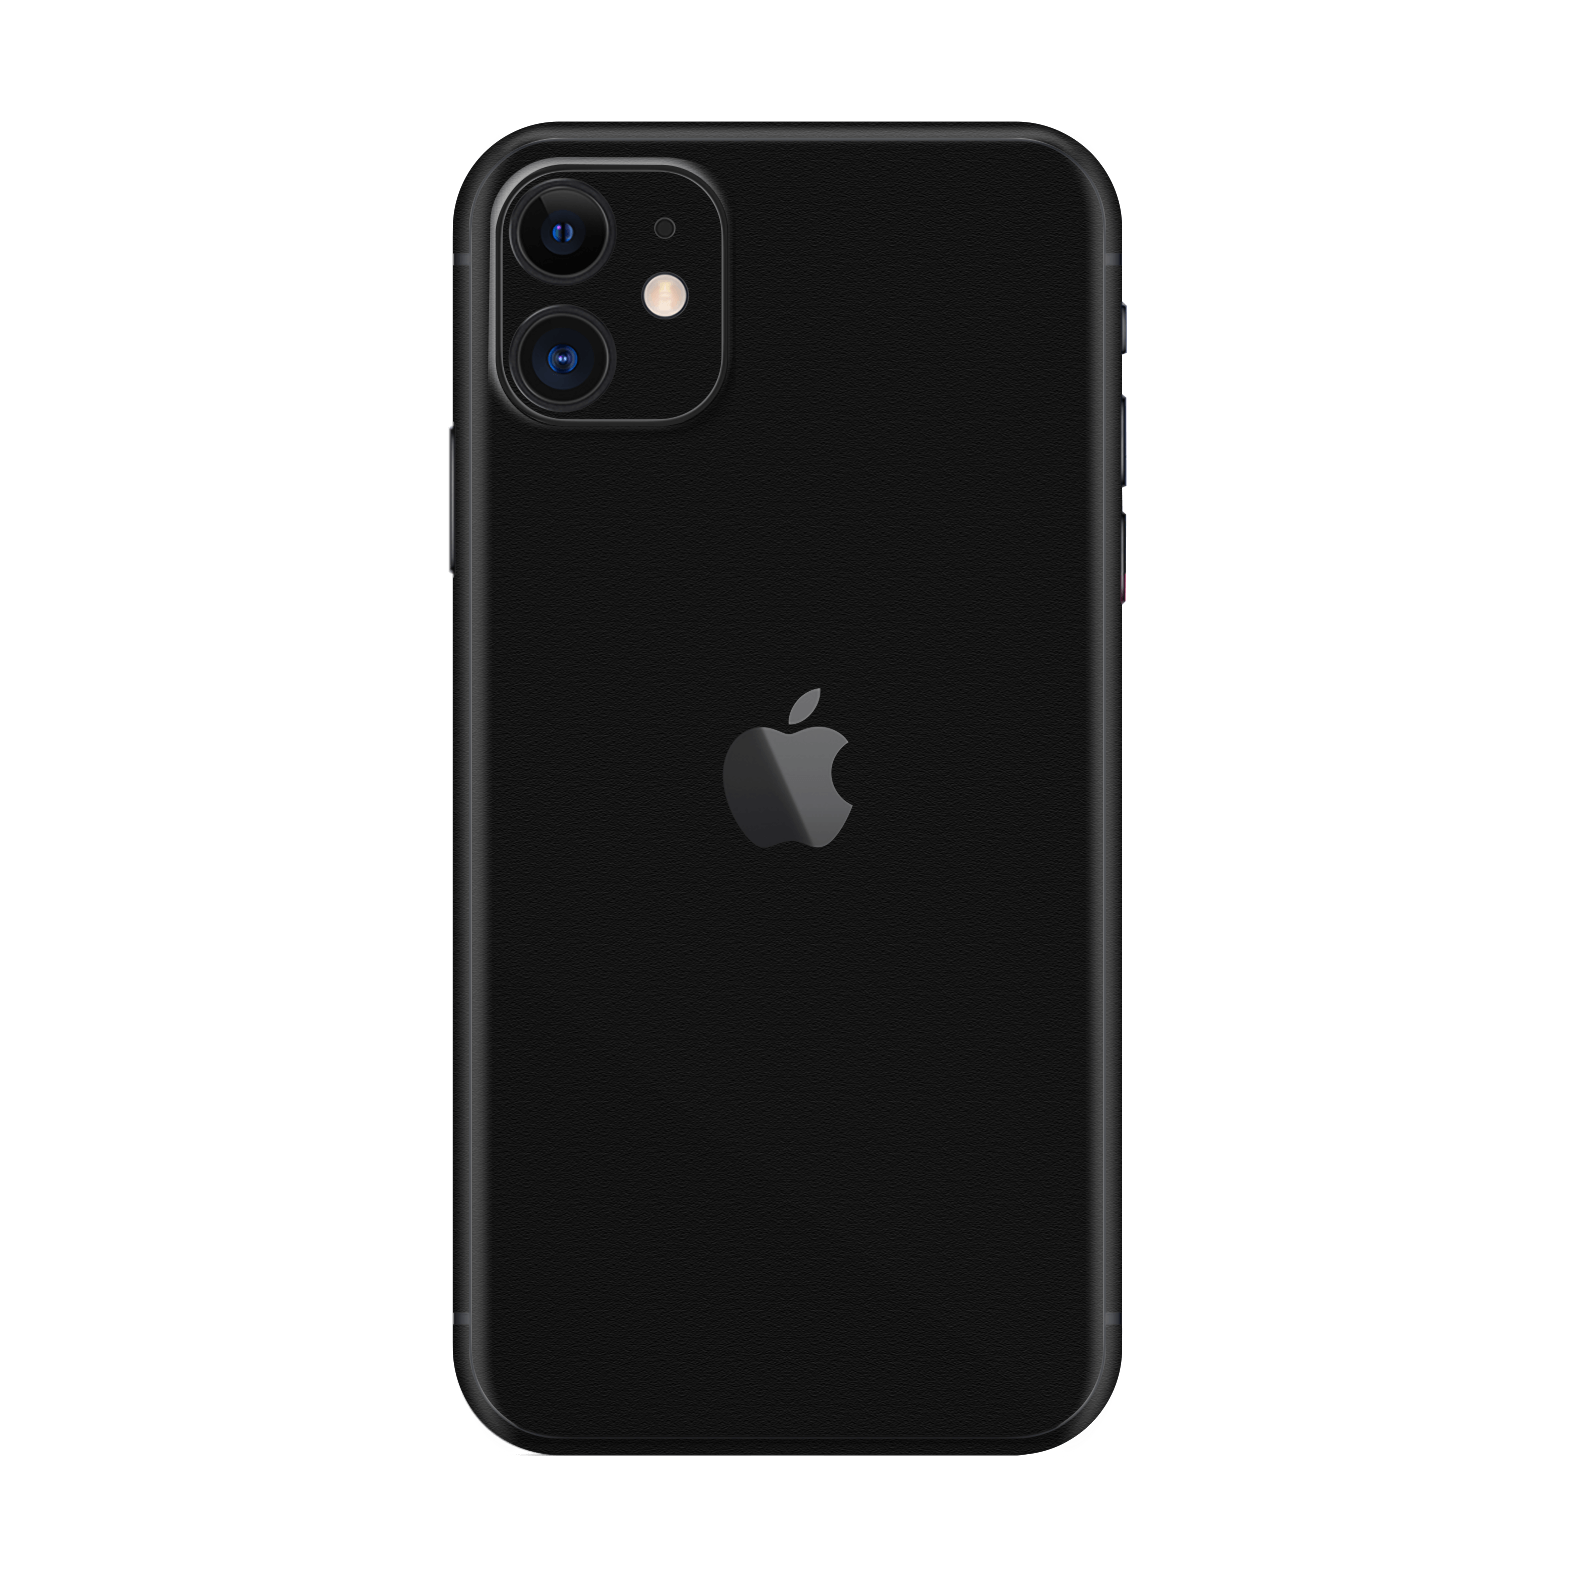 iPhone 11 Luxuria Raven Black 3D Textured Skin Wrap Sticker Decal Cover Protector by EasySkinz